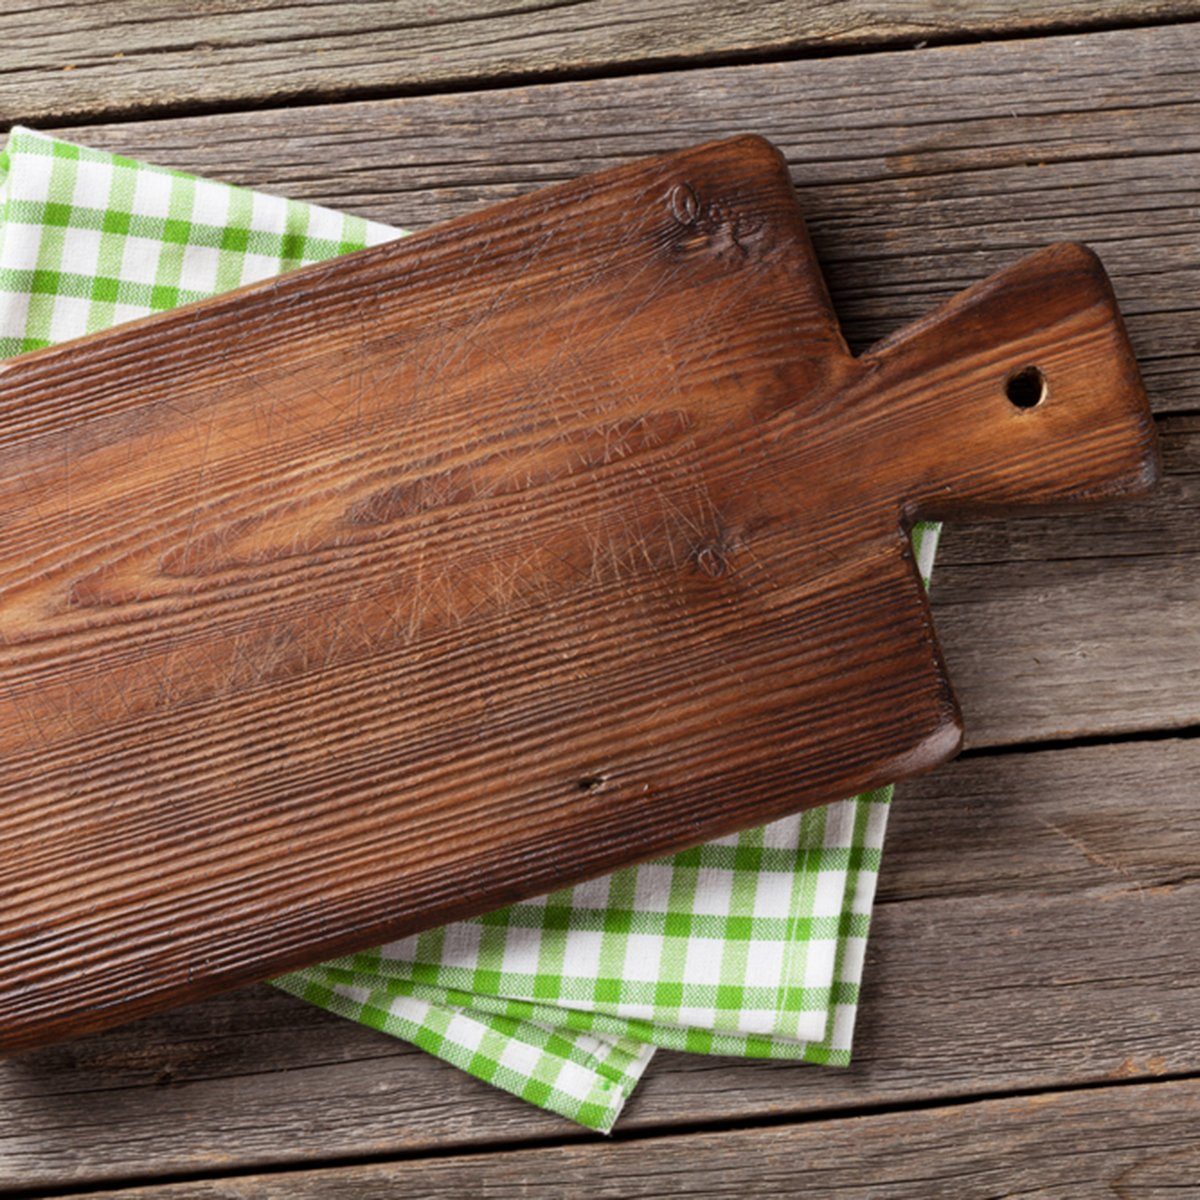 Cutting board over towel on wooden kitchen table.